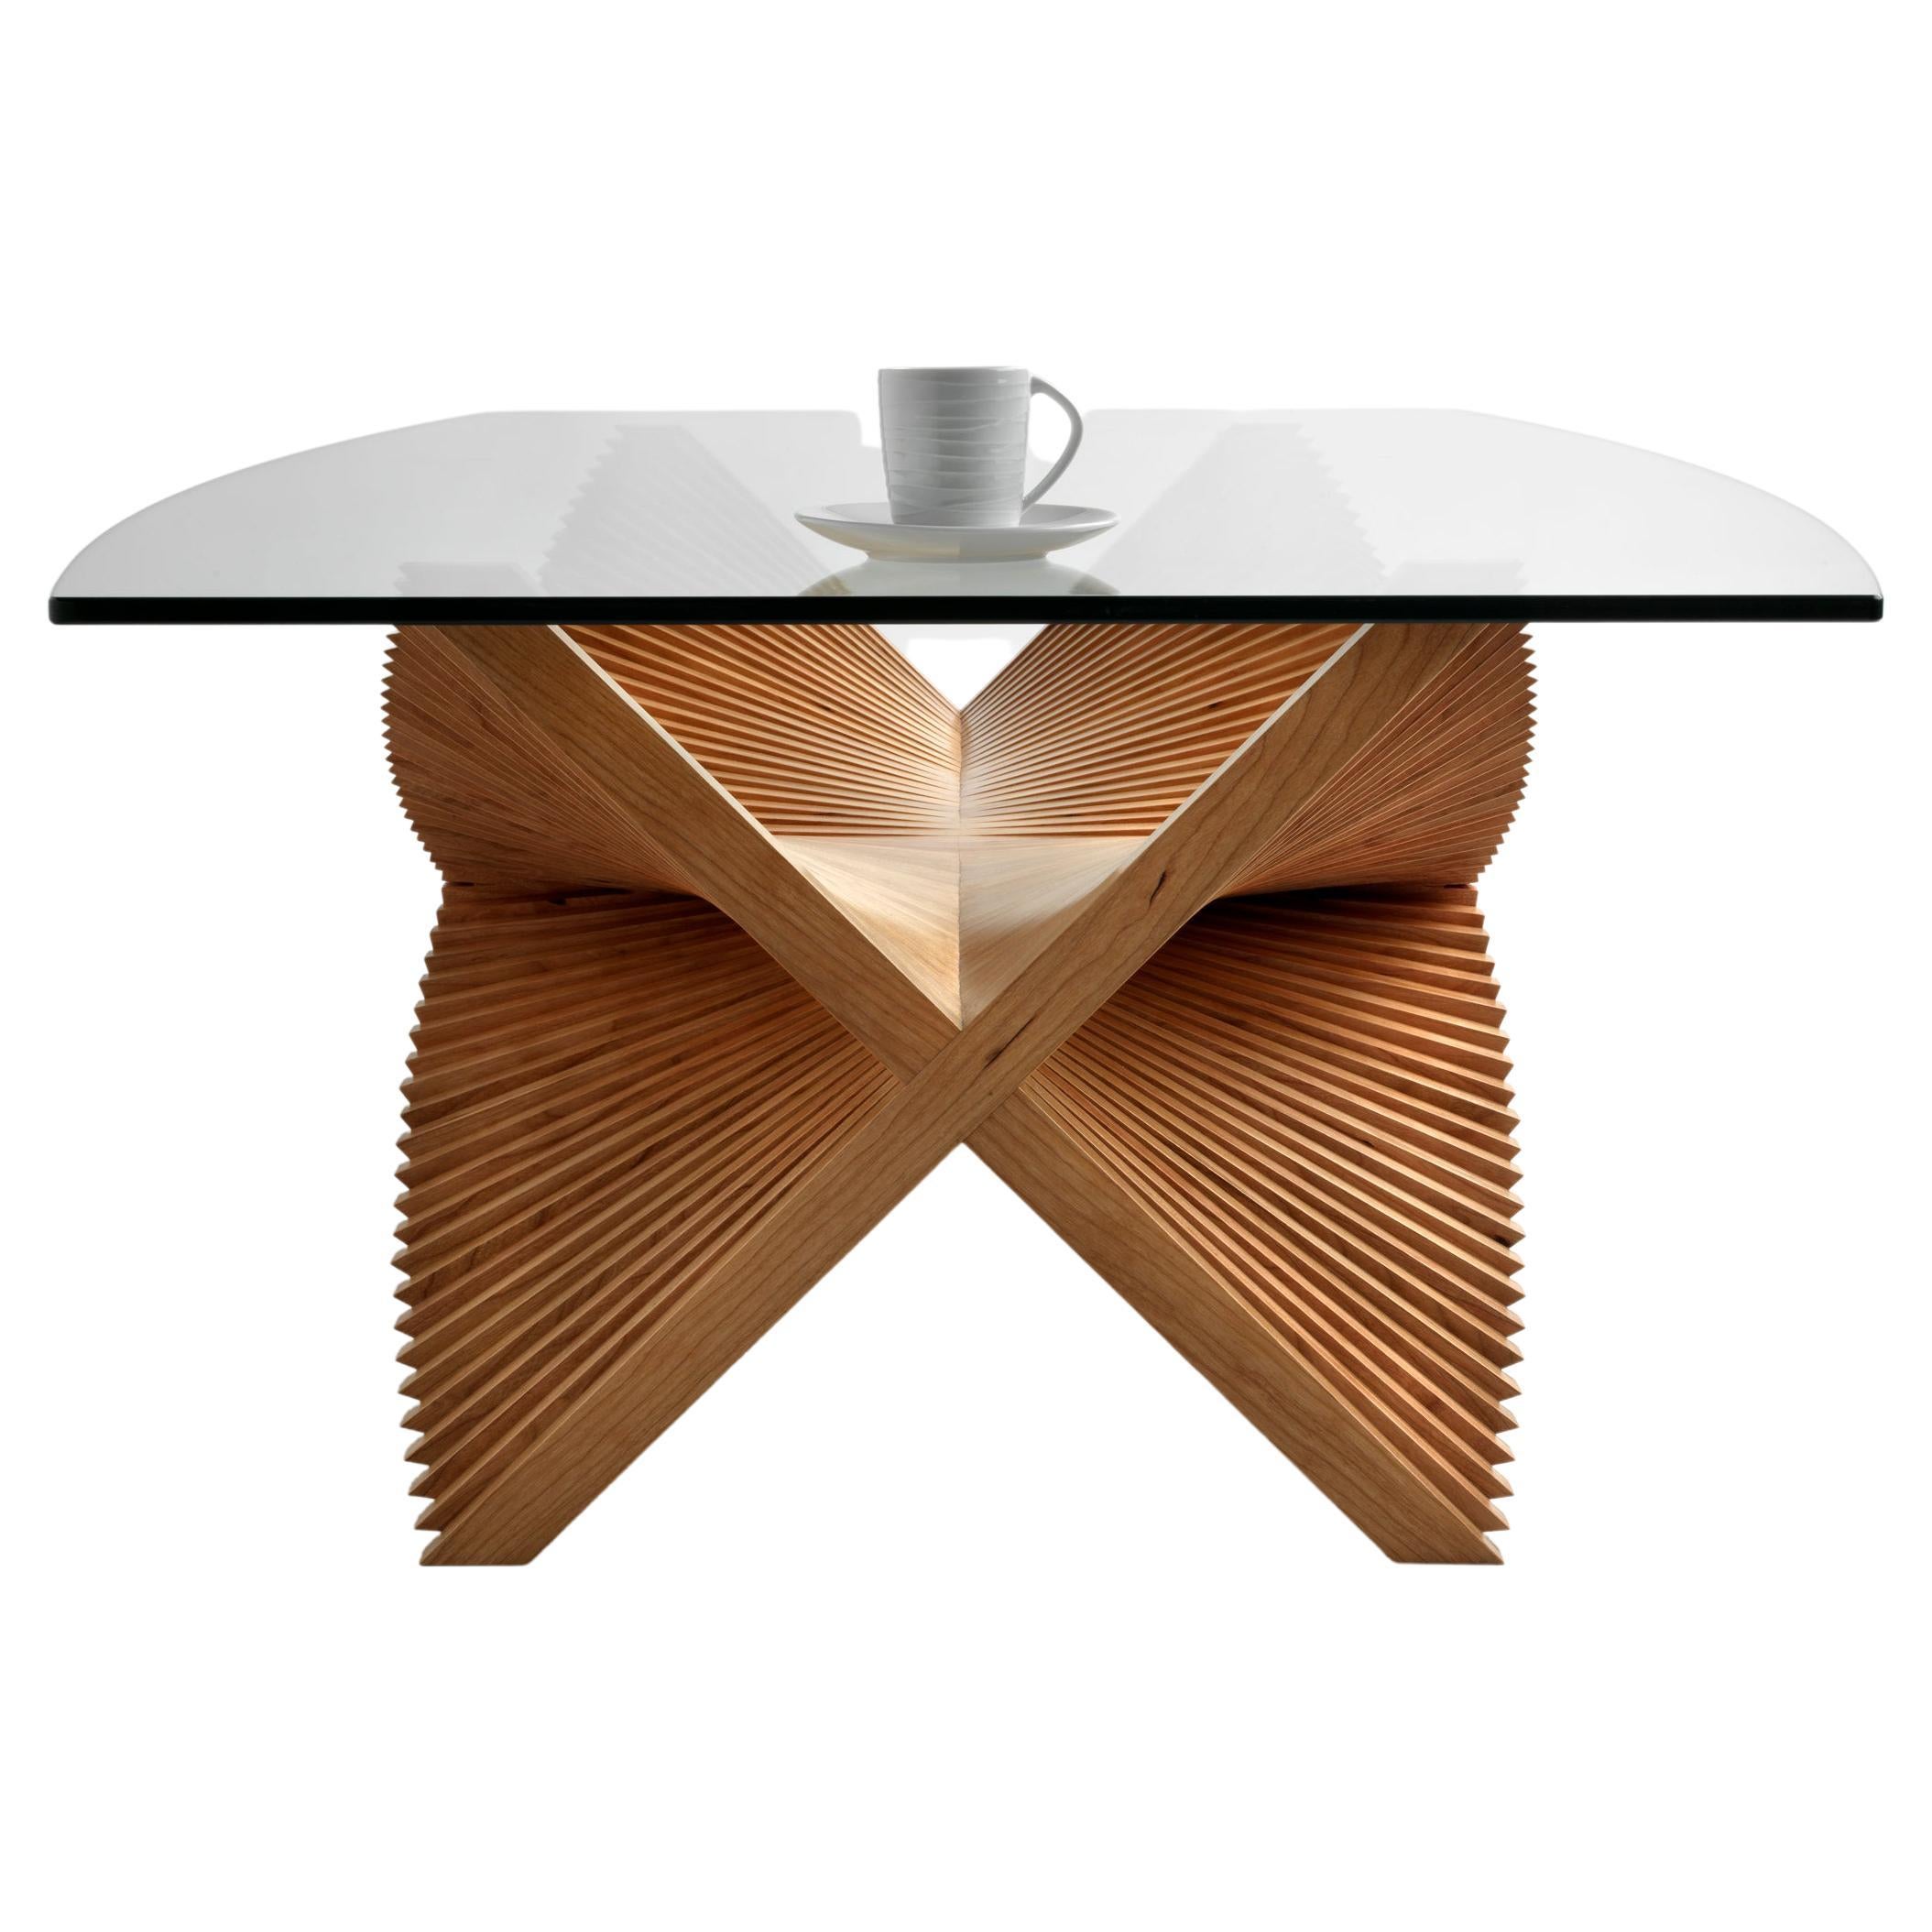 Beating Wings, marked a conscious move into a more sculptural line of work, fusing geometry with organic forms. This limited edition coffee table was the first piece in the Strata series, which is based on using multiple layers to create a sense of